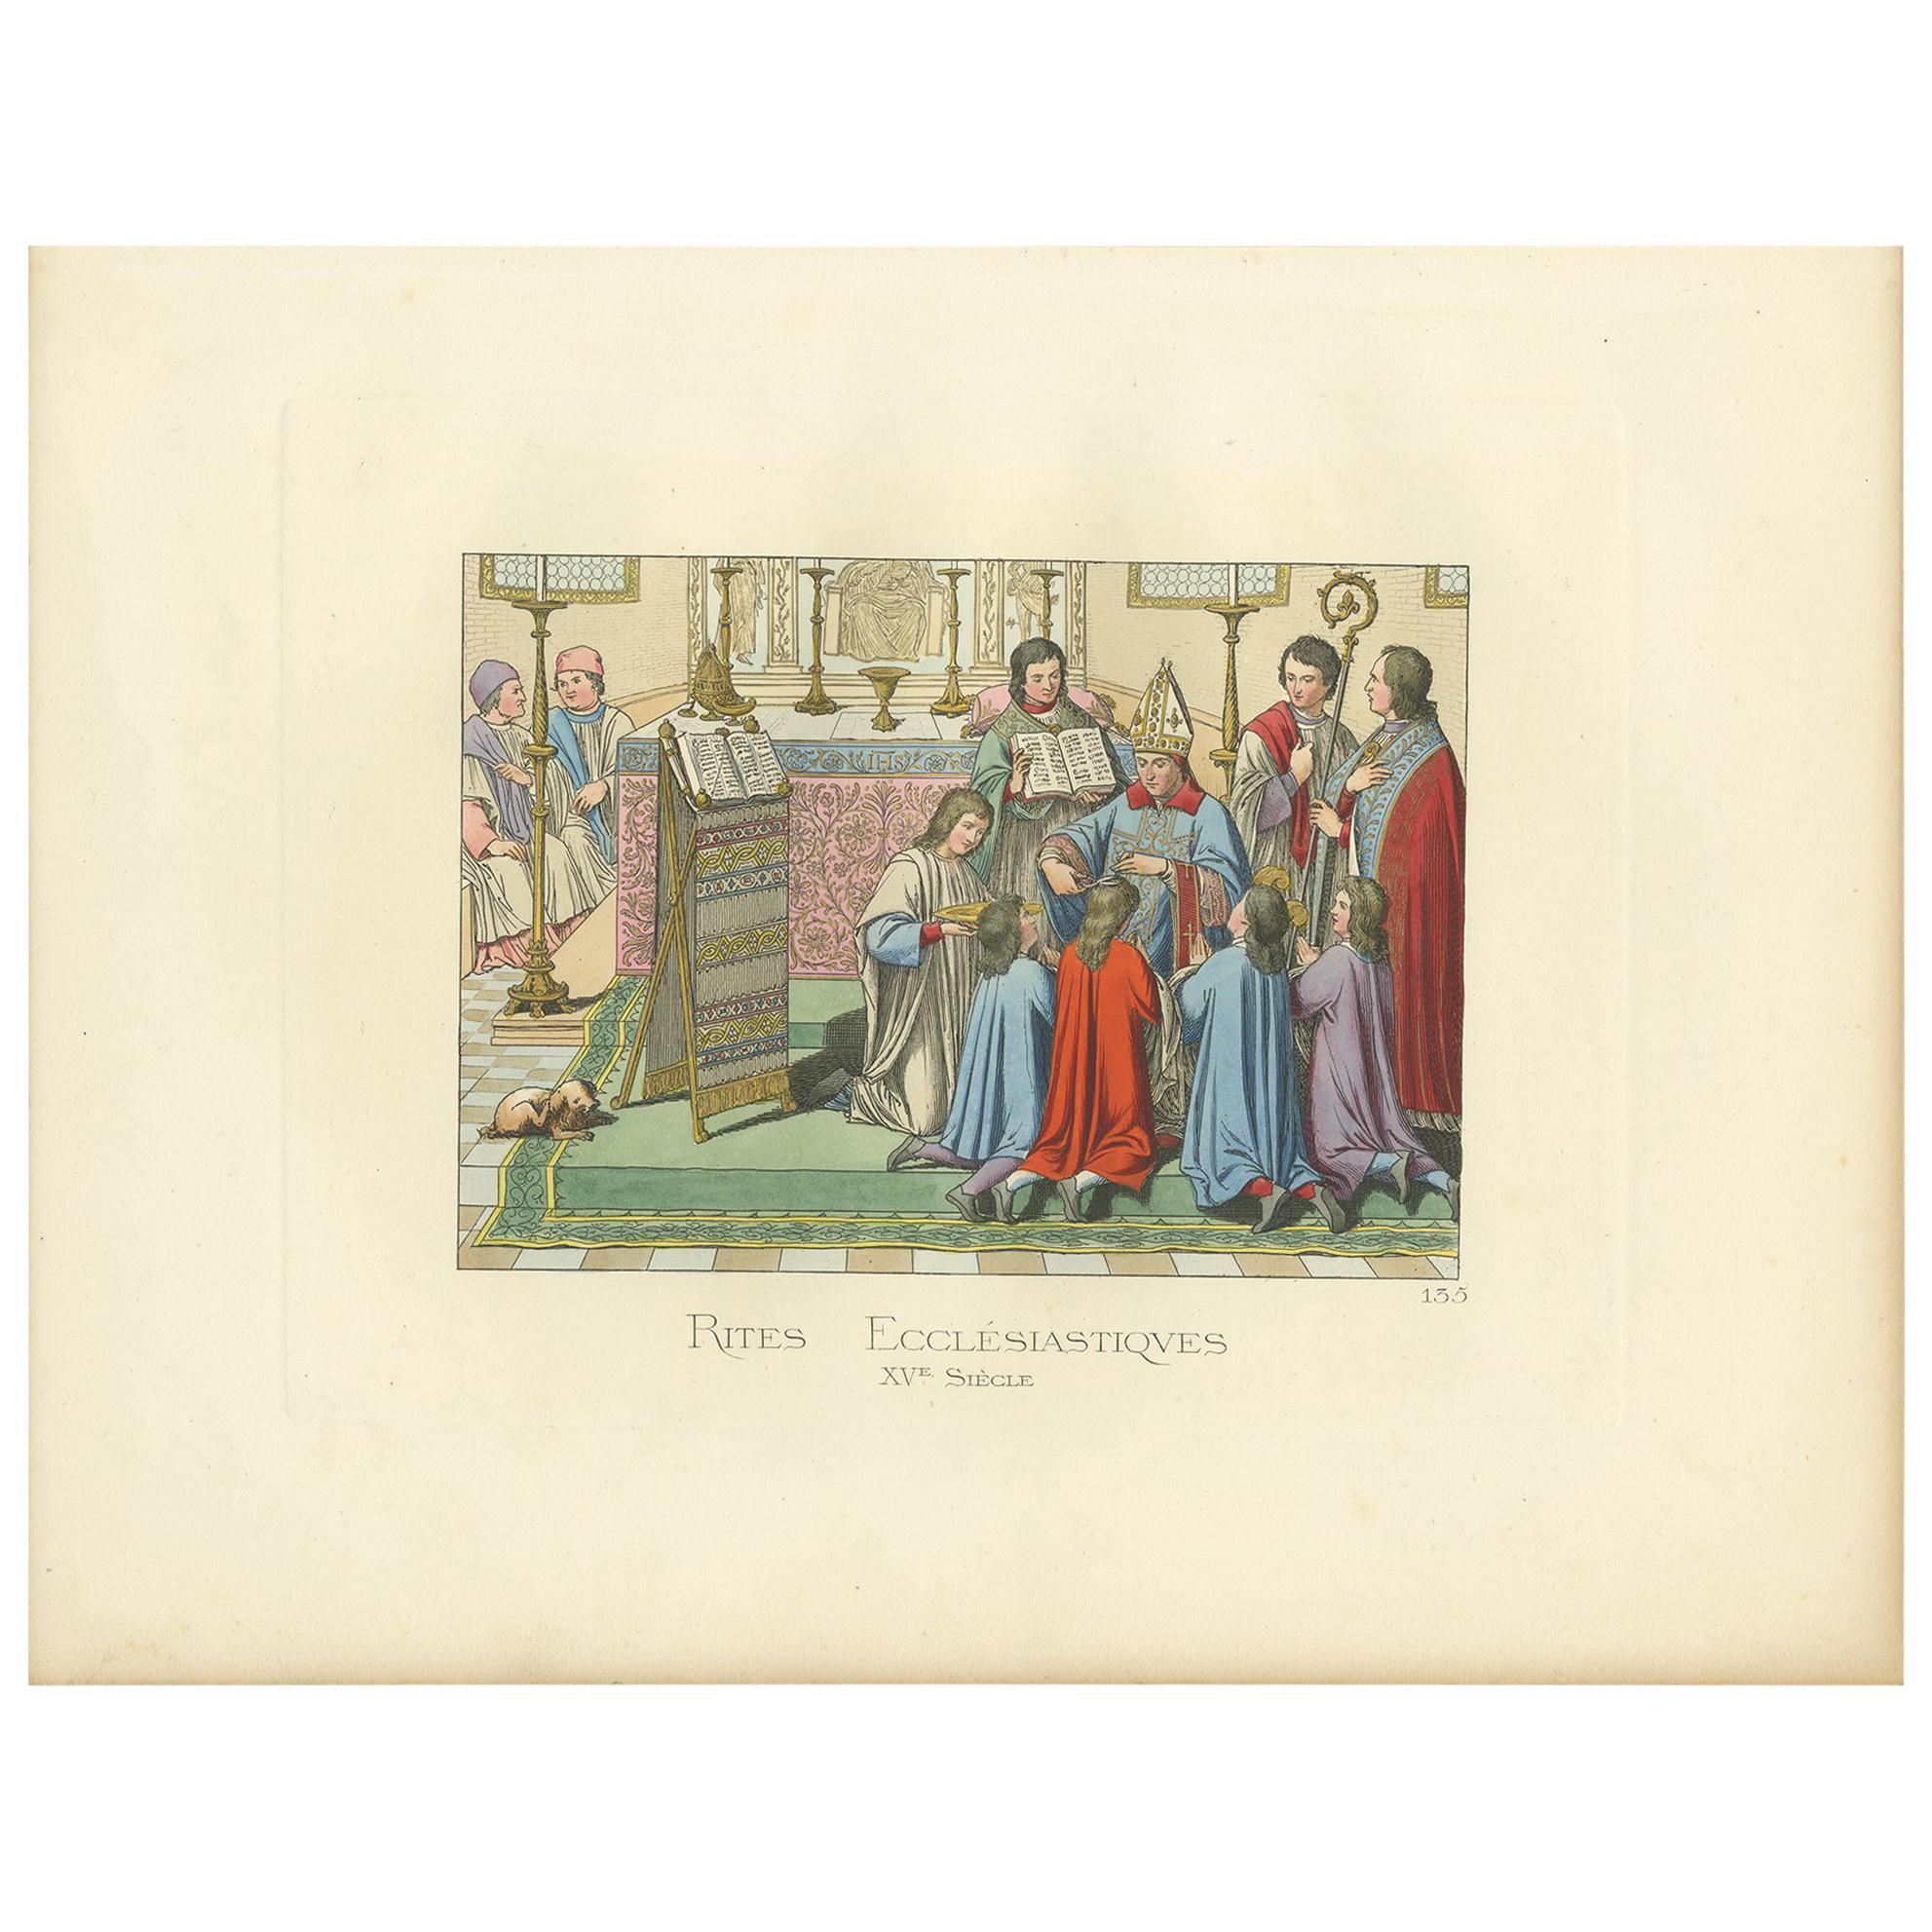 Antique Print of Ecclesiastical Rites, 15th Century, by Bonnard, 1860 For Sale